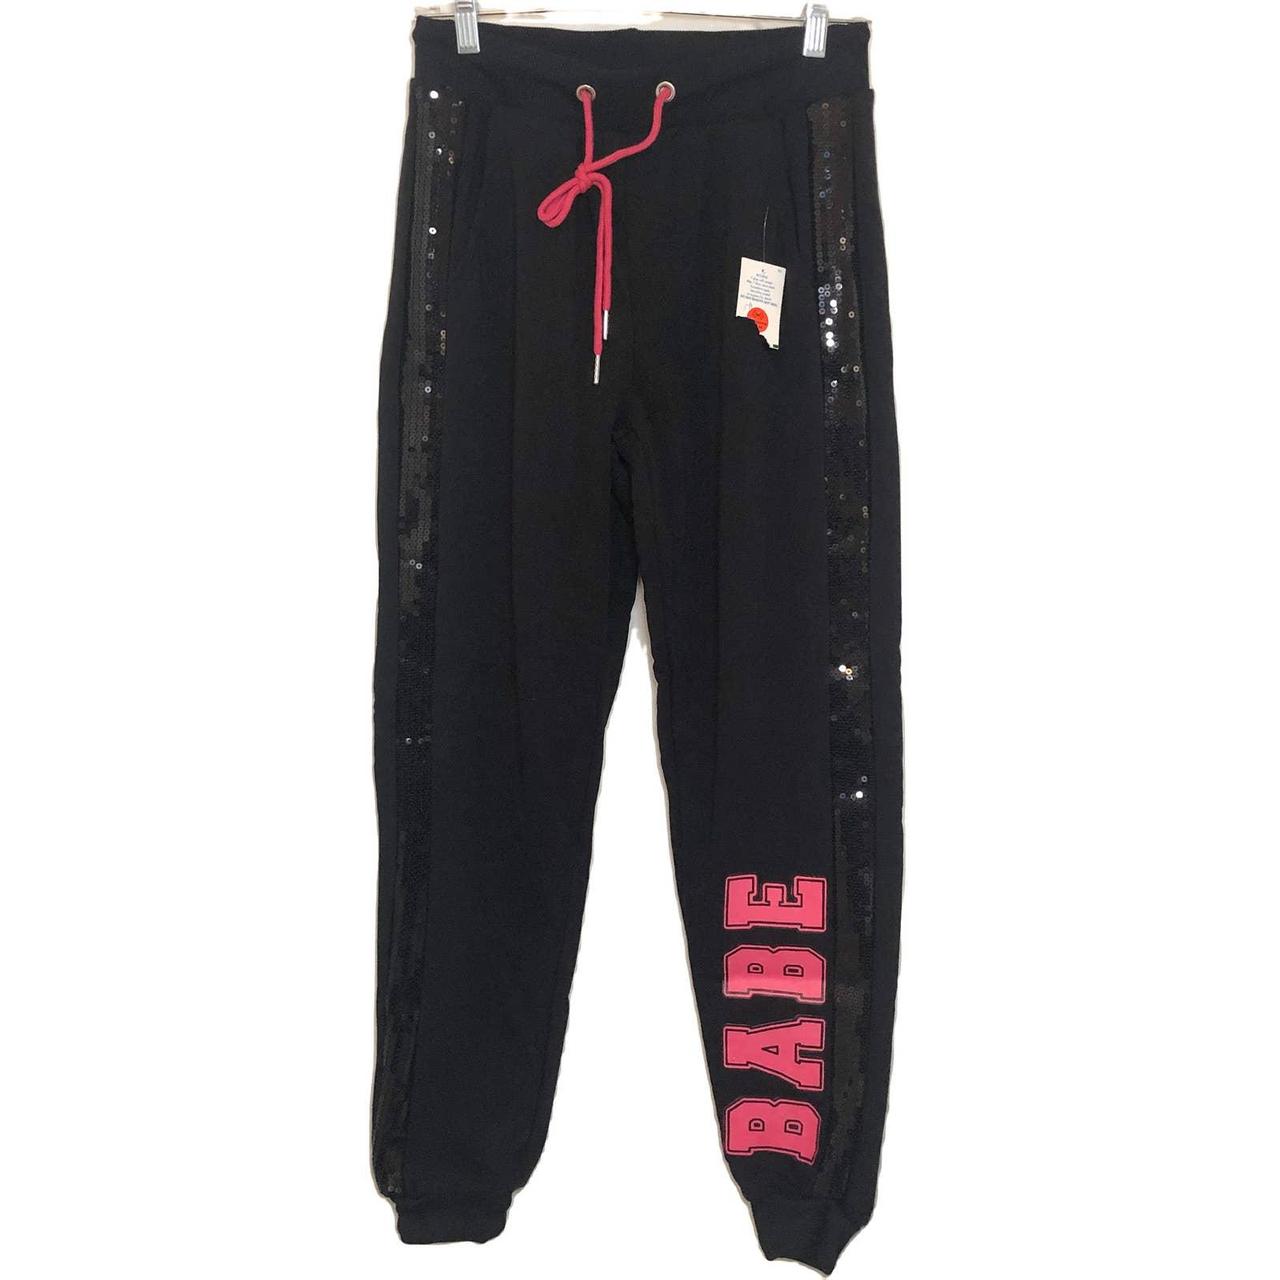 New Look Women's Black and Pink Jeans (2)